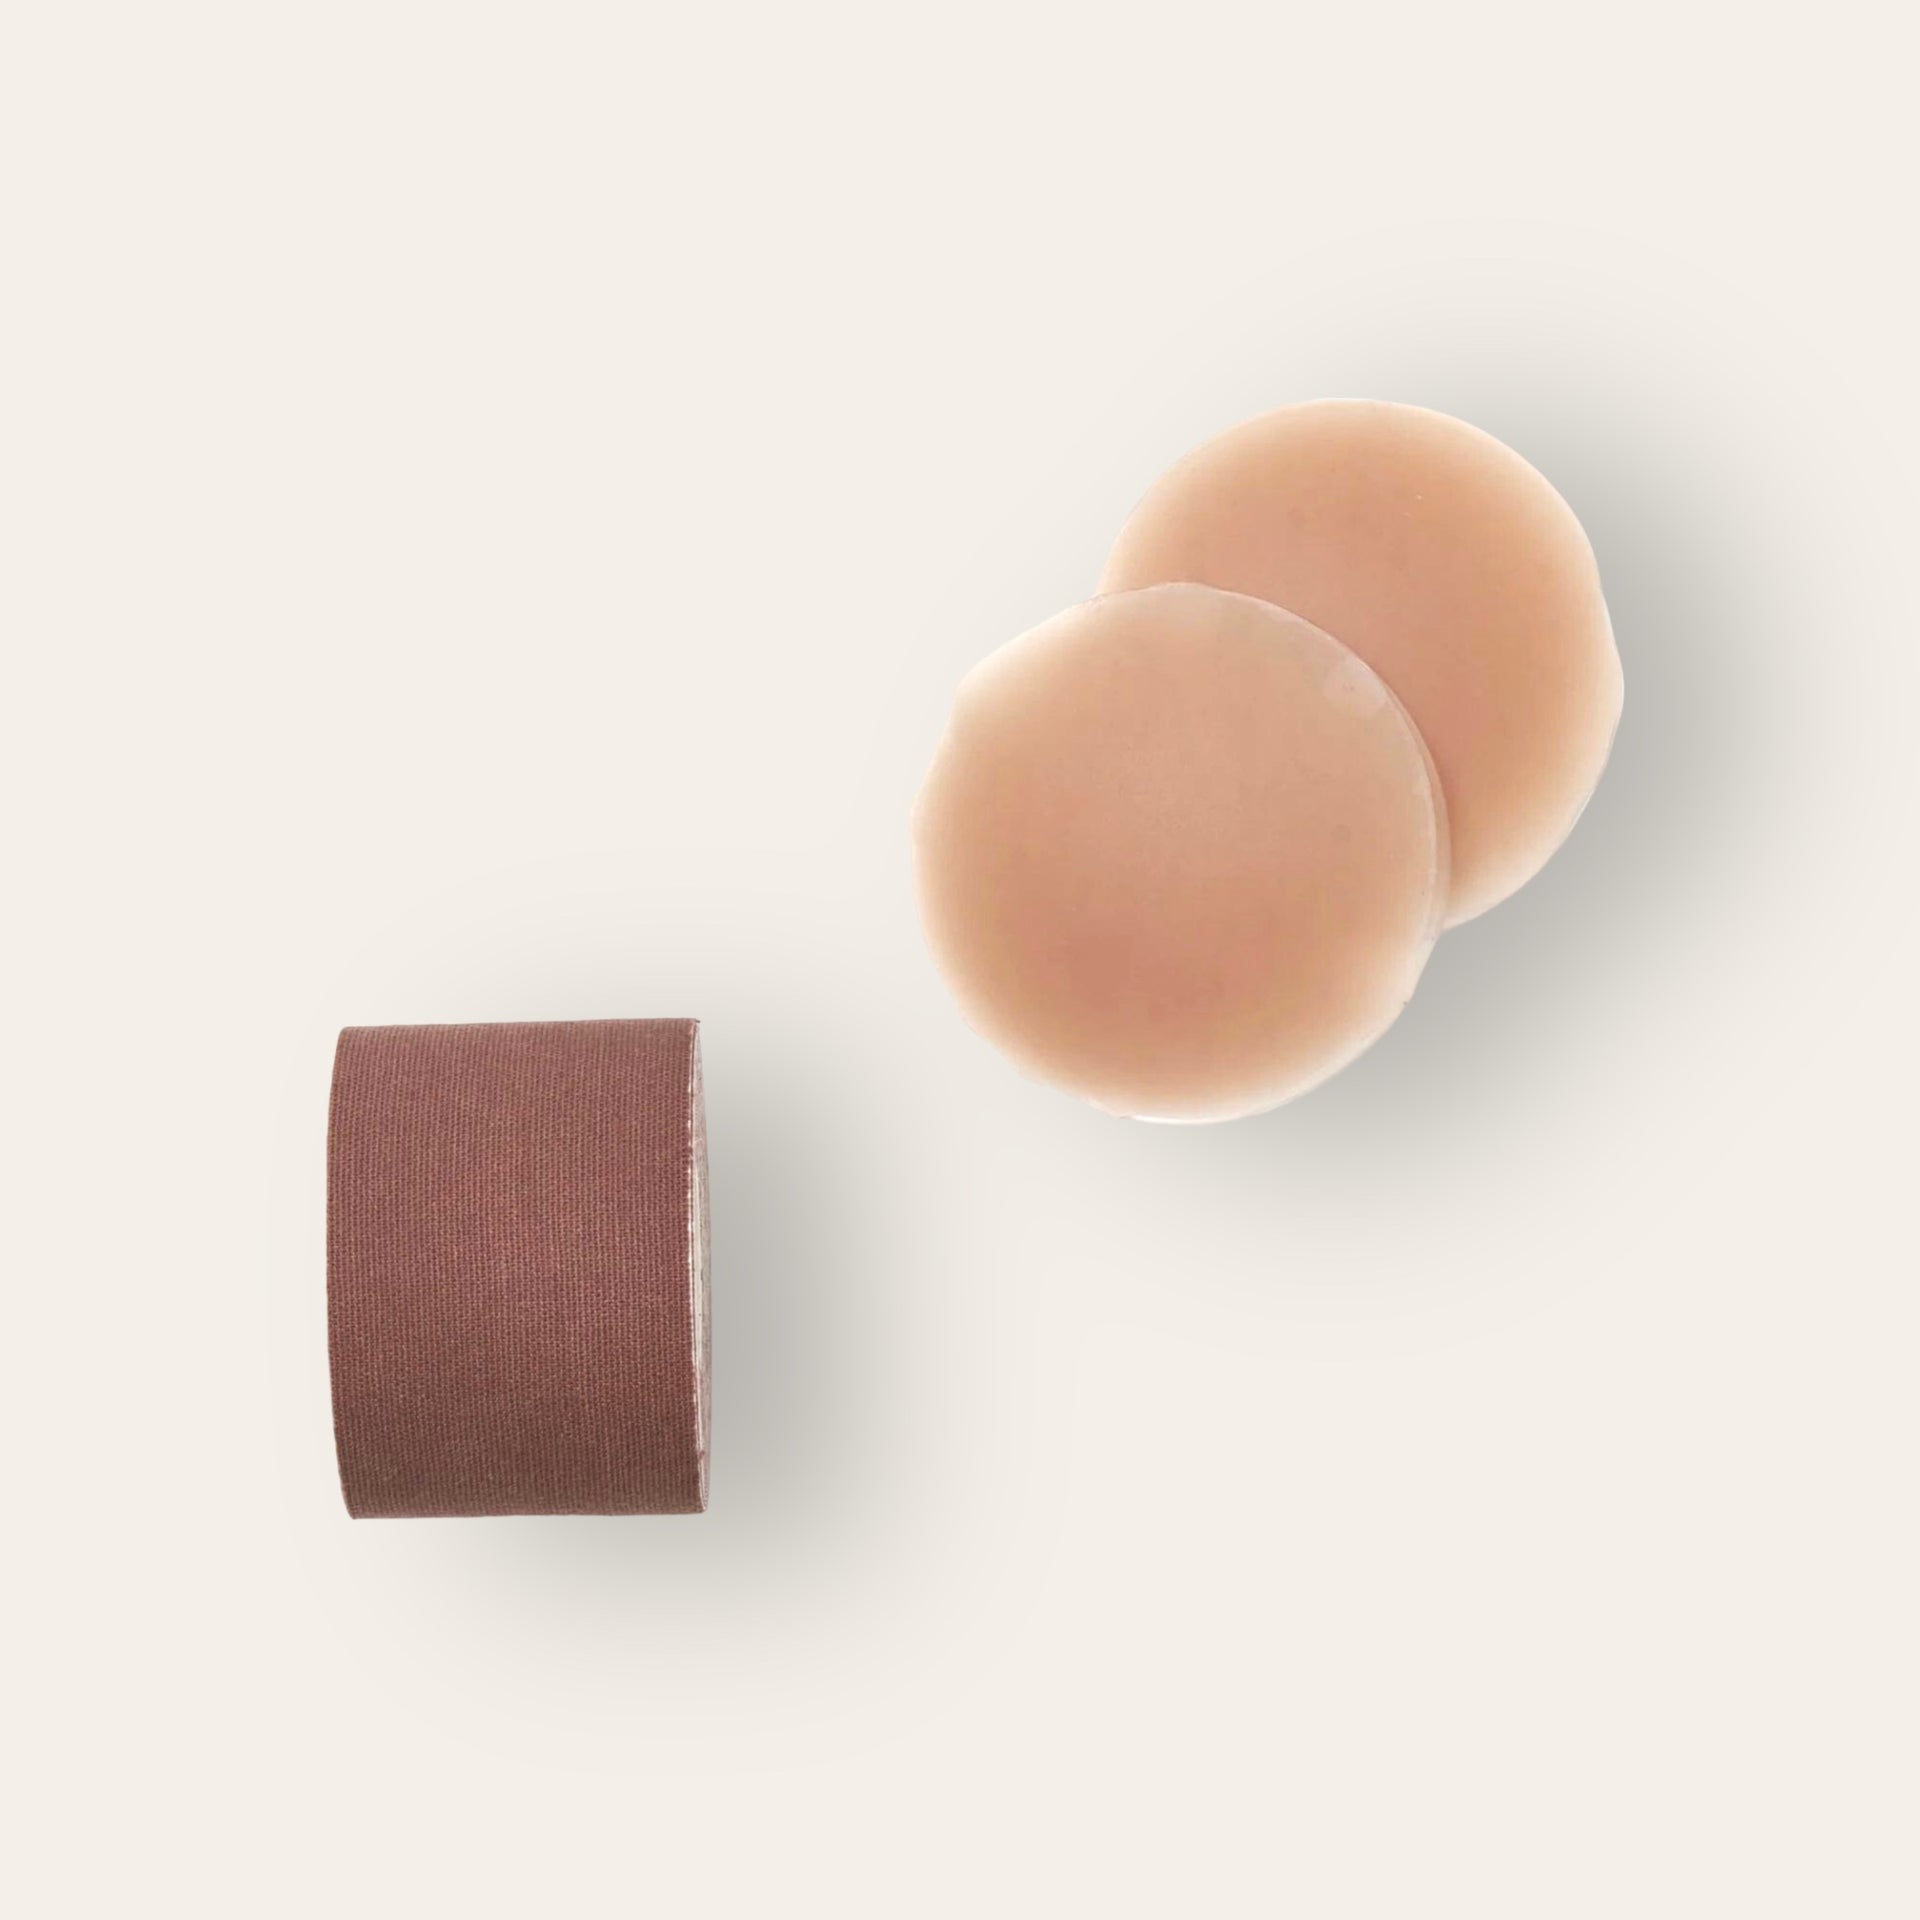 Silicone Nipple Cover + Breast Lift Boobs Tape - Chocolate